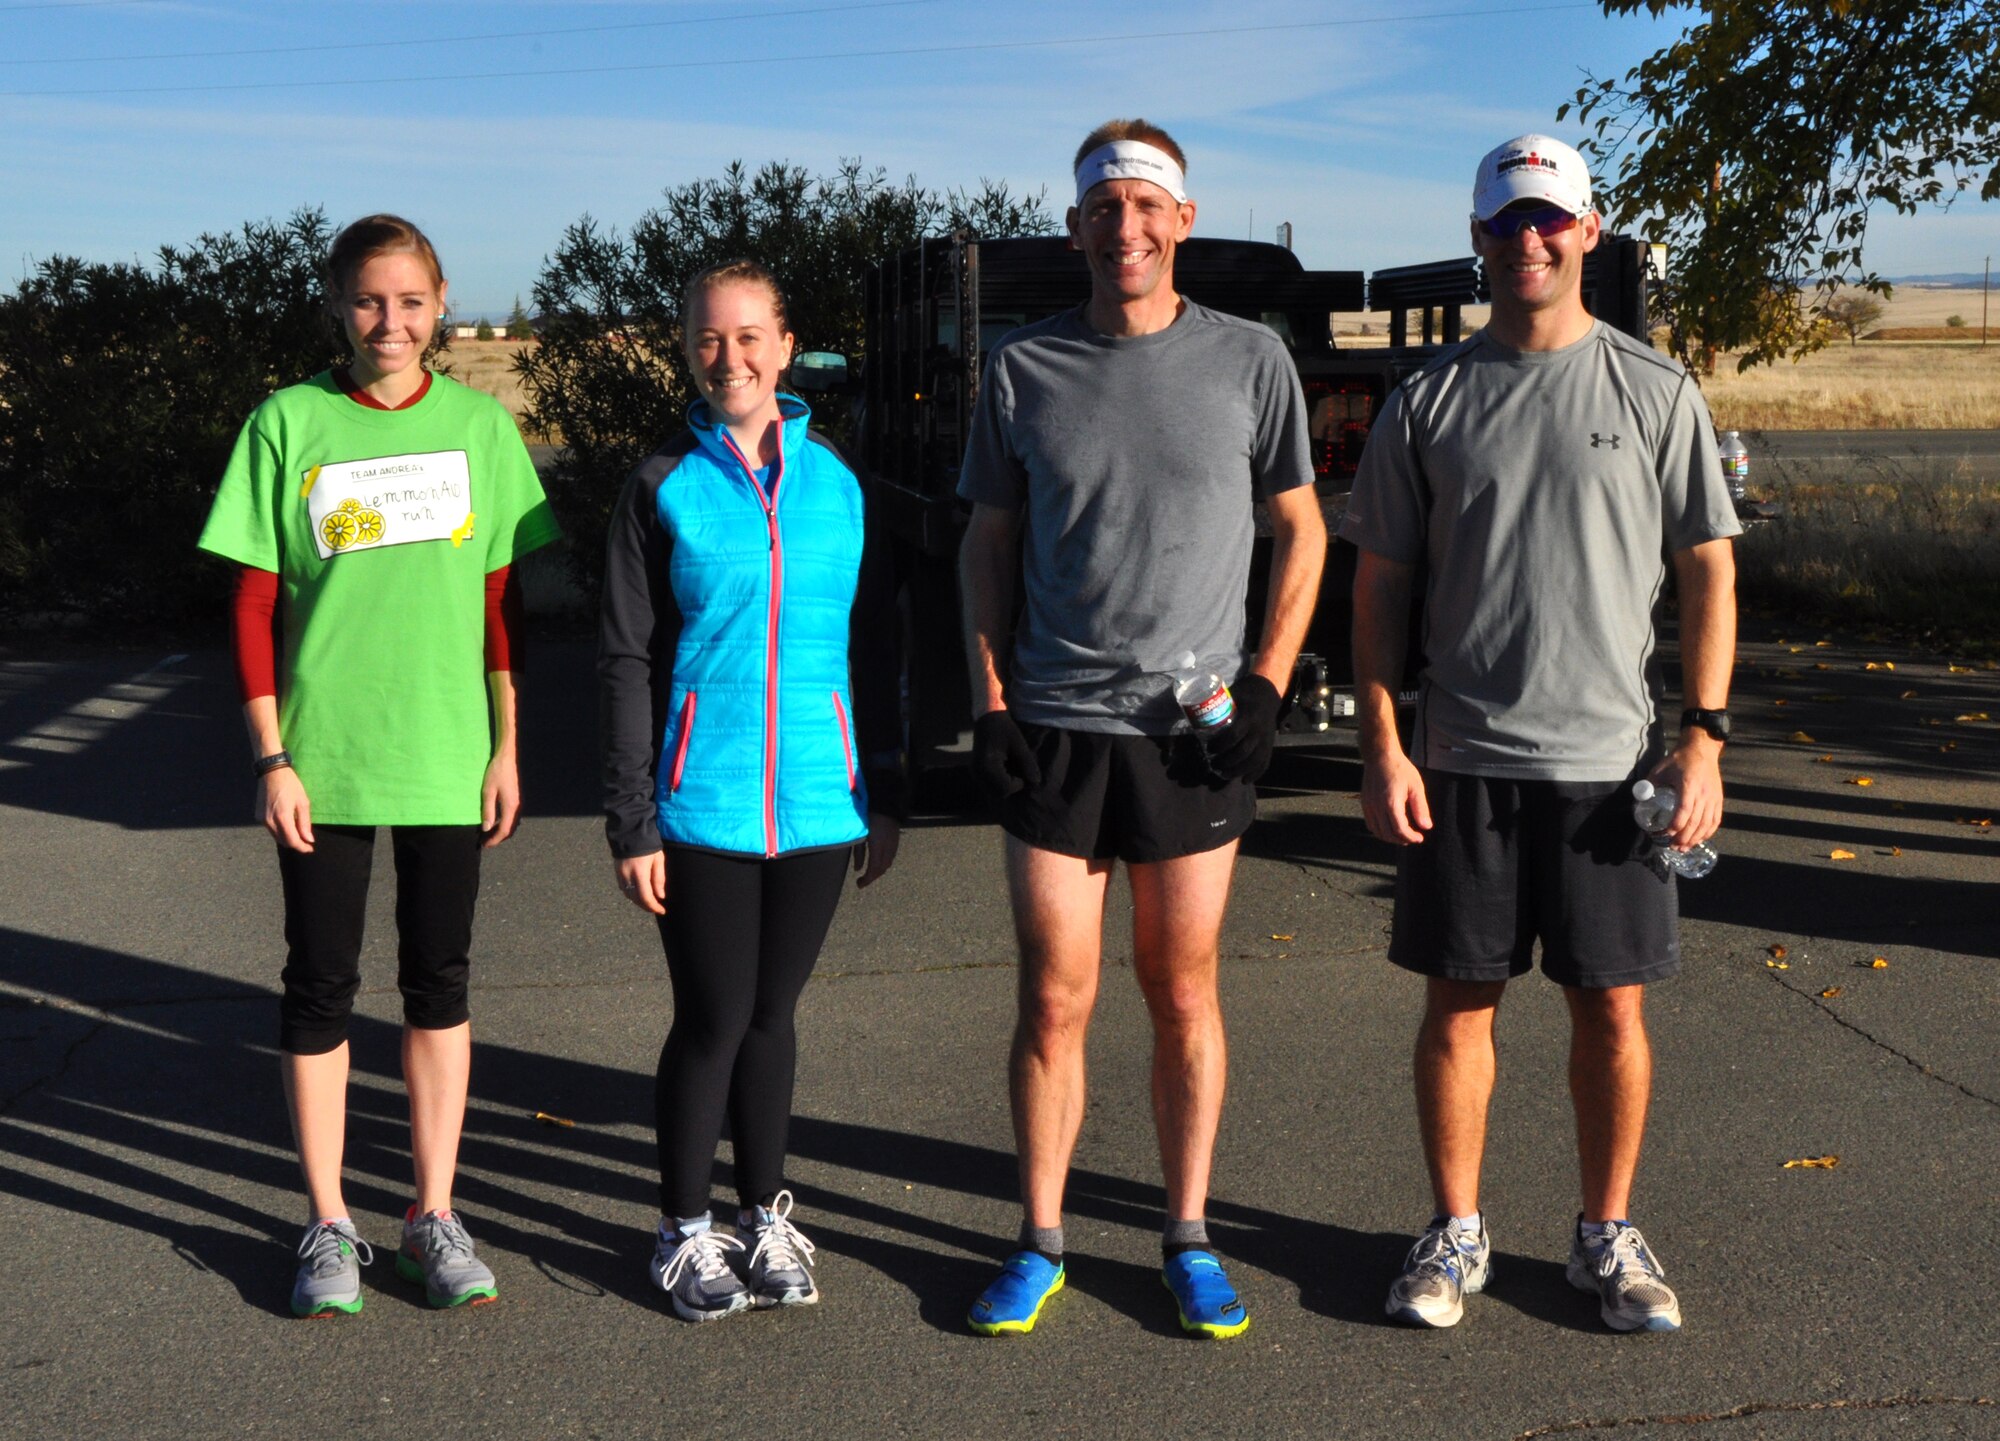 The top two male and female runners from the Turkey Trot 5K pose for picture at Beale Air Force Base, Calif., Nov. 14, 2102. Jessica Clayton(Far left) finished first overall with a time of 18:37. (U.S. Air Force photo by Staff Sgt. Robert M. Trujillo/Released)